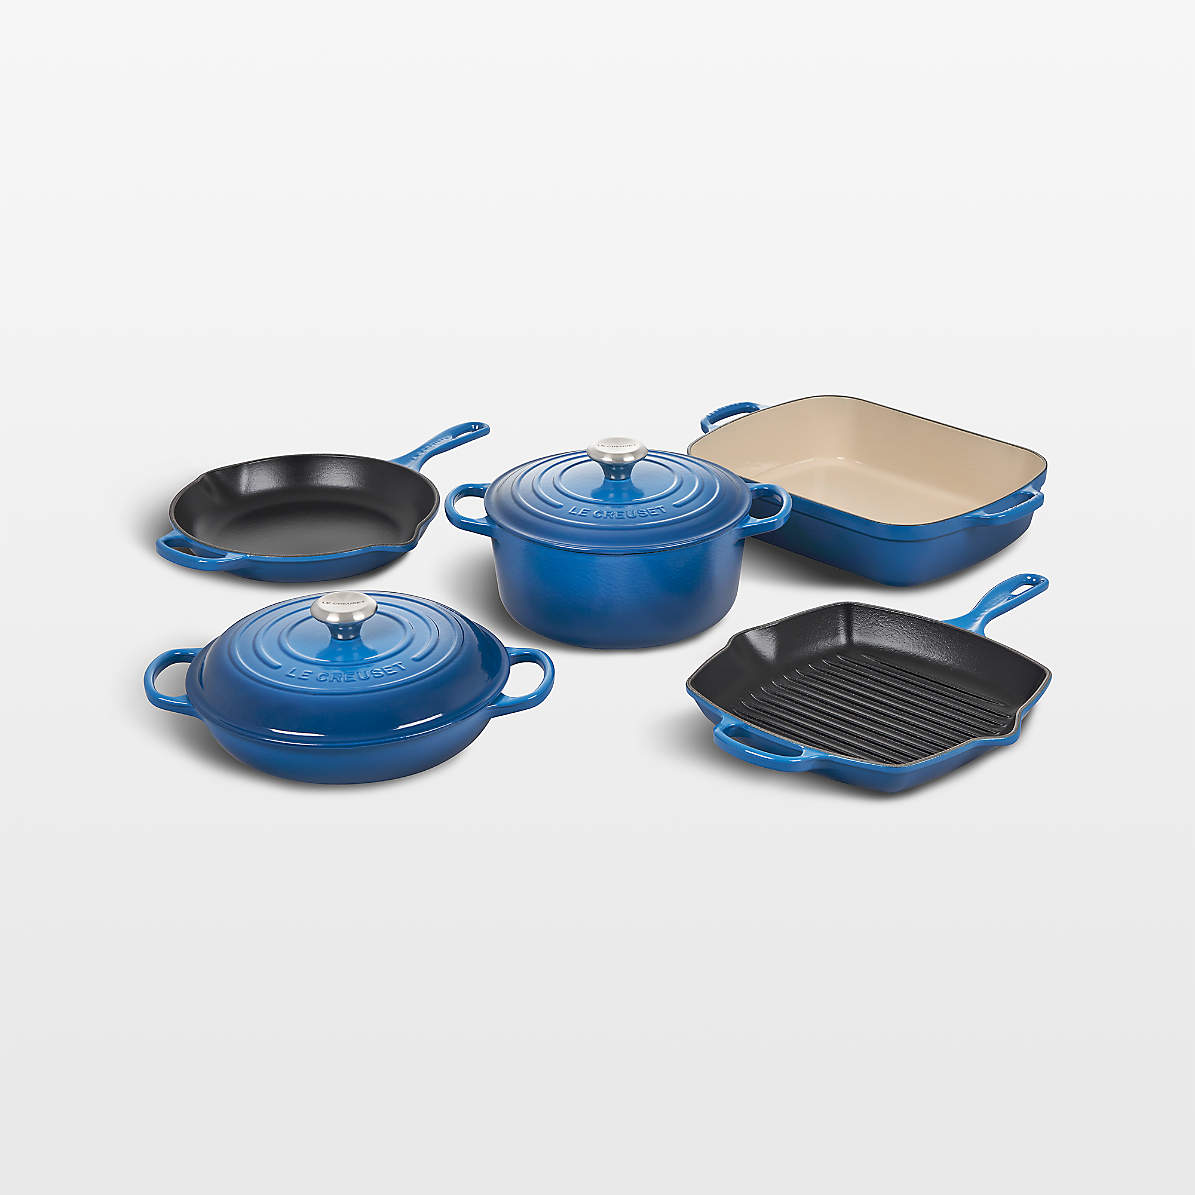  Le Creuset 20 Piece Kitchen Essentials Cookware Set with  Enameled Cast-Iron, Enameled Stoneware and Toughened Non-Stick - White:  Home & Kitchen